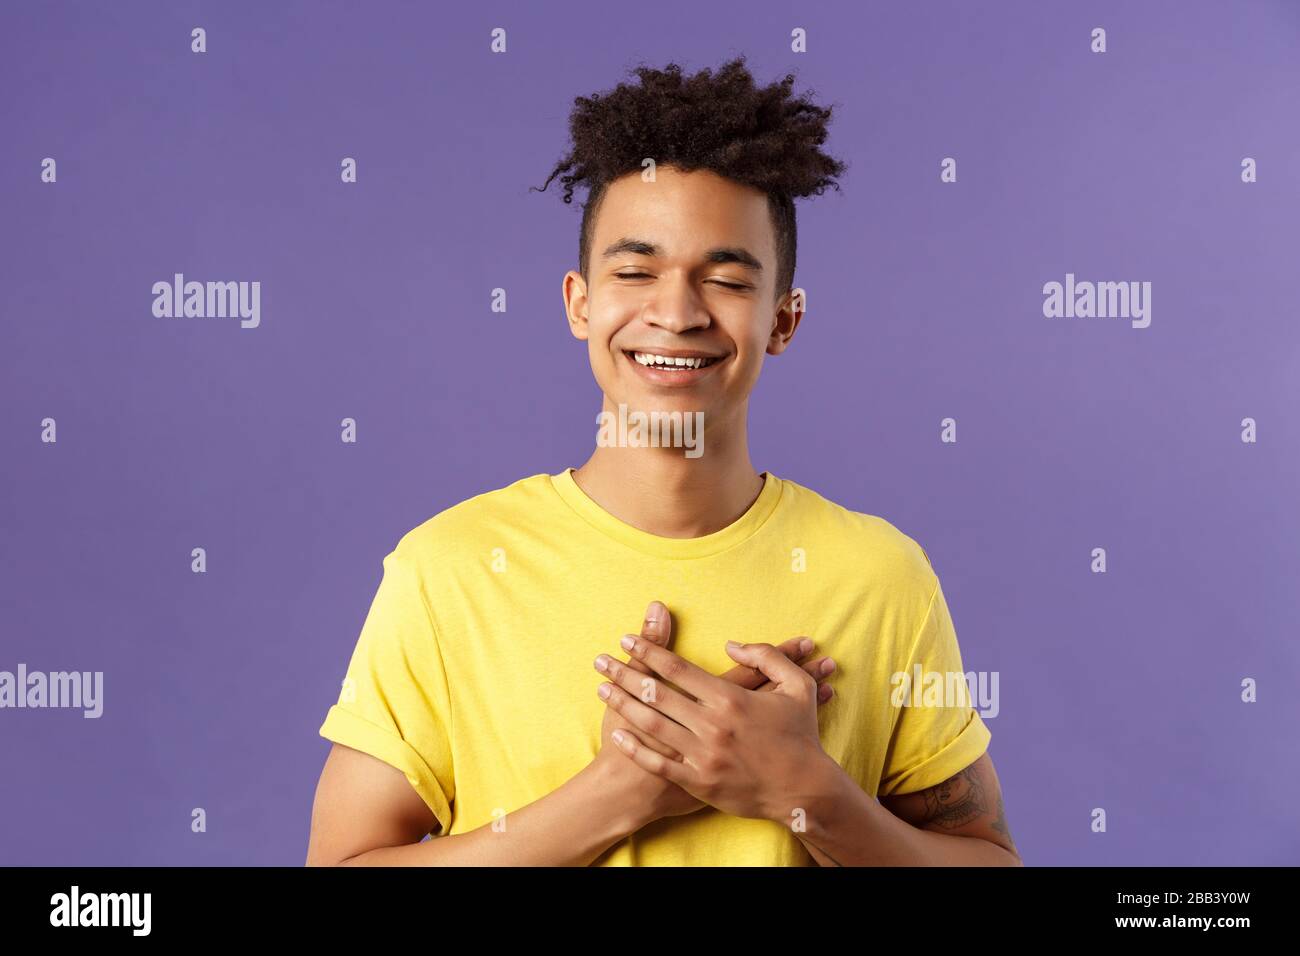 Close-up portrait of happy, upbeat young dreamy guy, remember sweet memories, hold hands on heart, smiling touched and delighted, close eyes grinning Stock Photo